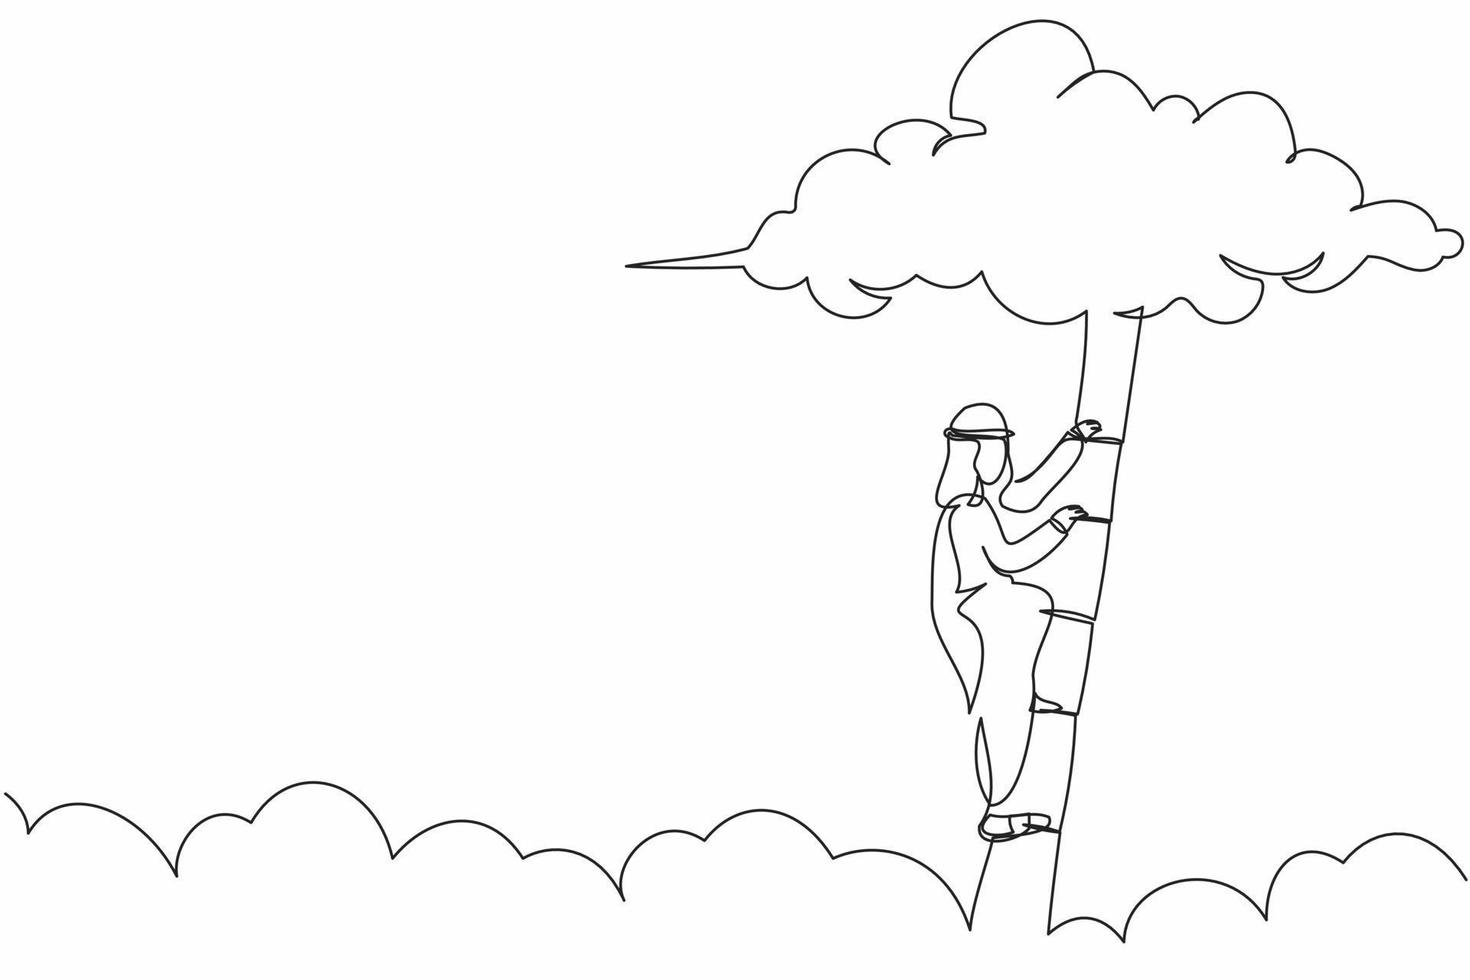 Single one line drawing active Arab businessman climbing up ladder to cloud. Worker rising business development. Professional growth promotion. Continuous line draw design graphic vector illustration